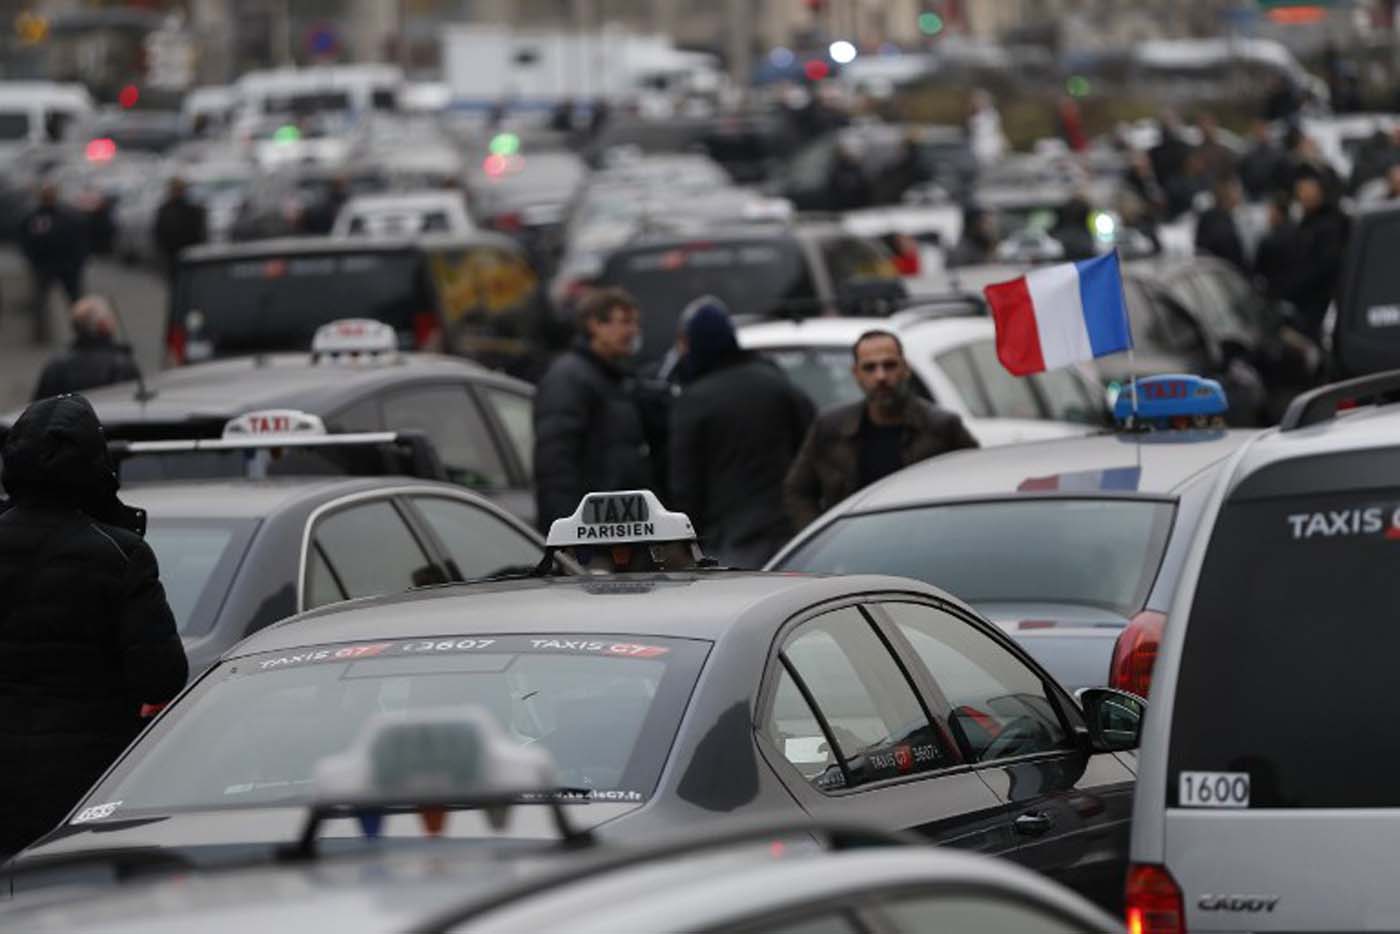 Taxi drivers block the traffic during a demonstration against the VTC (transport vehicle with chauffeur) on January 26, 2016 at porte Maillot in Paris. AFP PHOTO / THOMAS SAMSON / AFP / THOMAS SAMSON